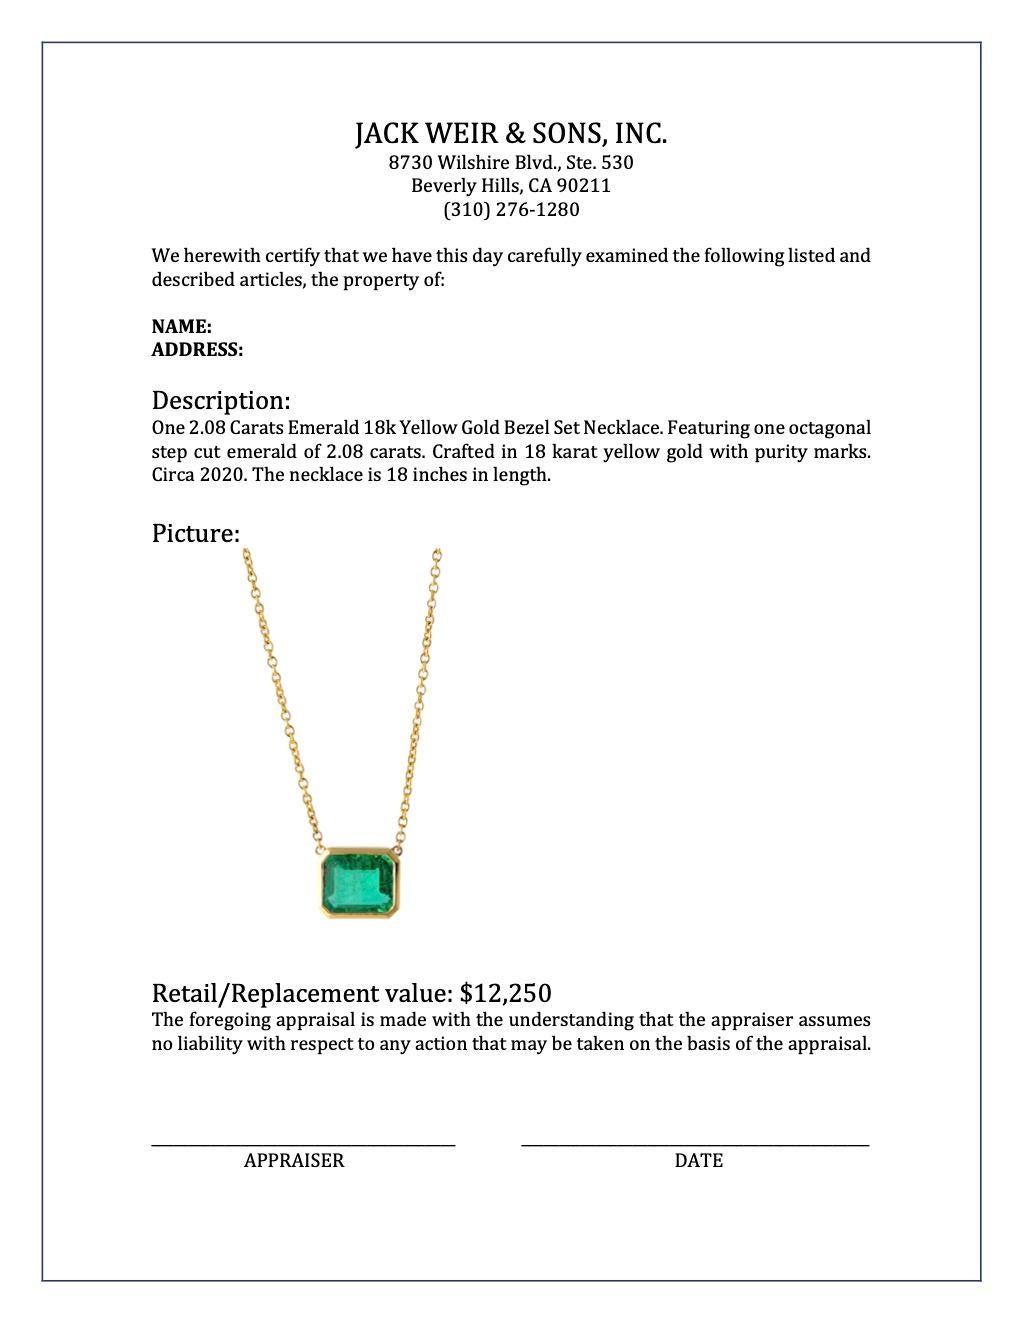 2.08 Carats Emerald 18k Yellow Gold Bezel Set Necklace In Excellent Condition For Sale In Beverly Hills, CA